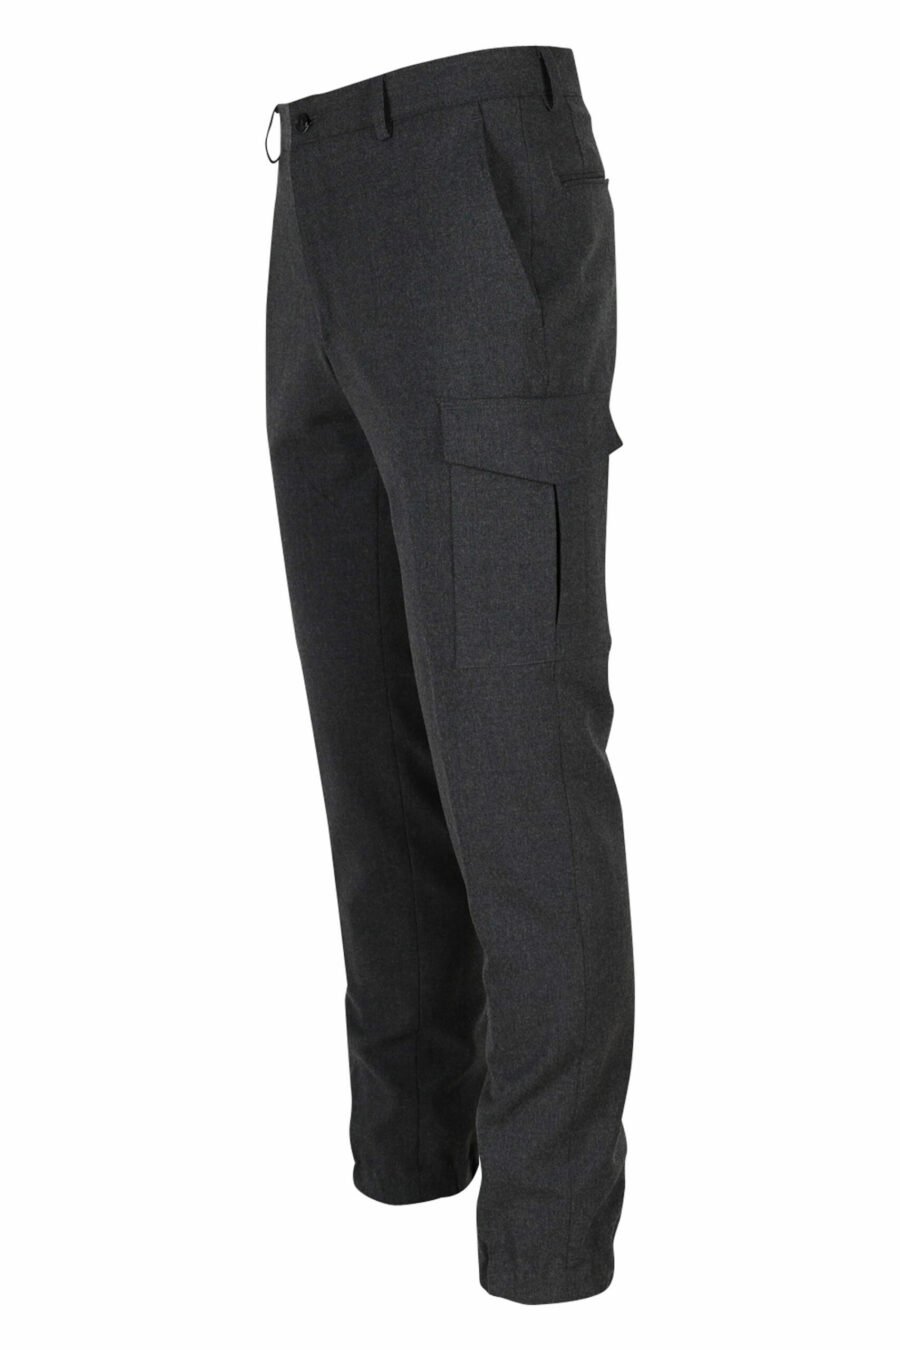 Grey suit trousers - 4062226397018 13 scaled